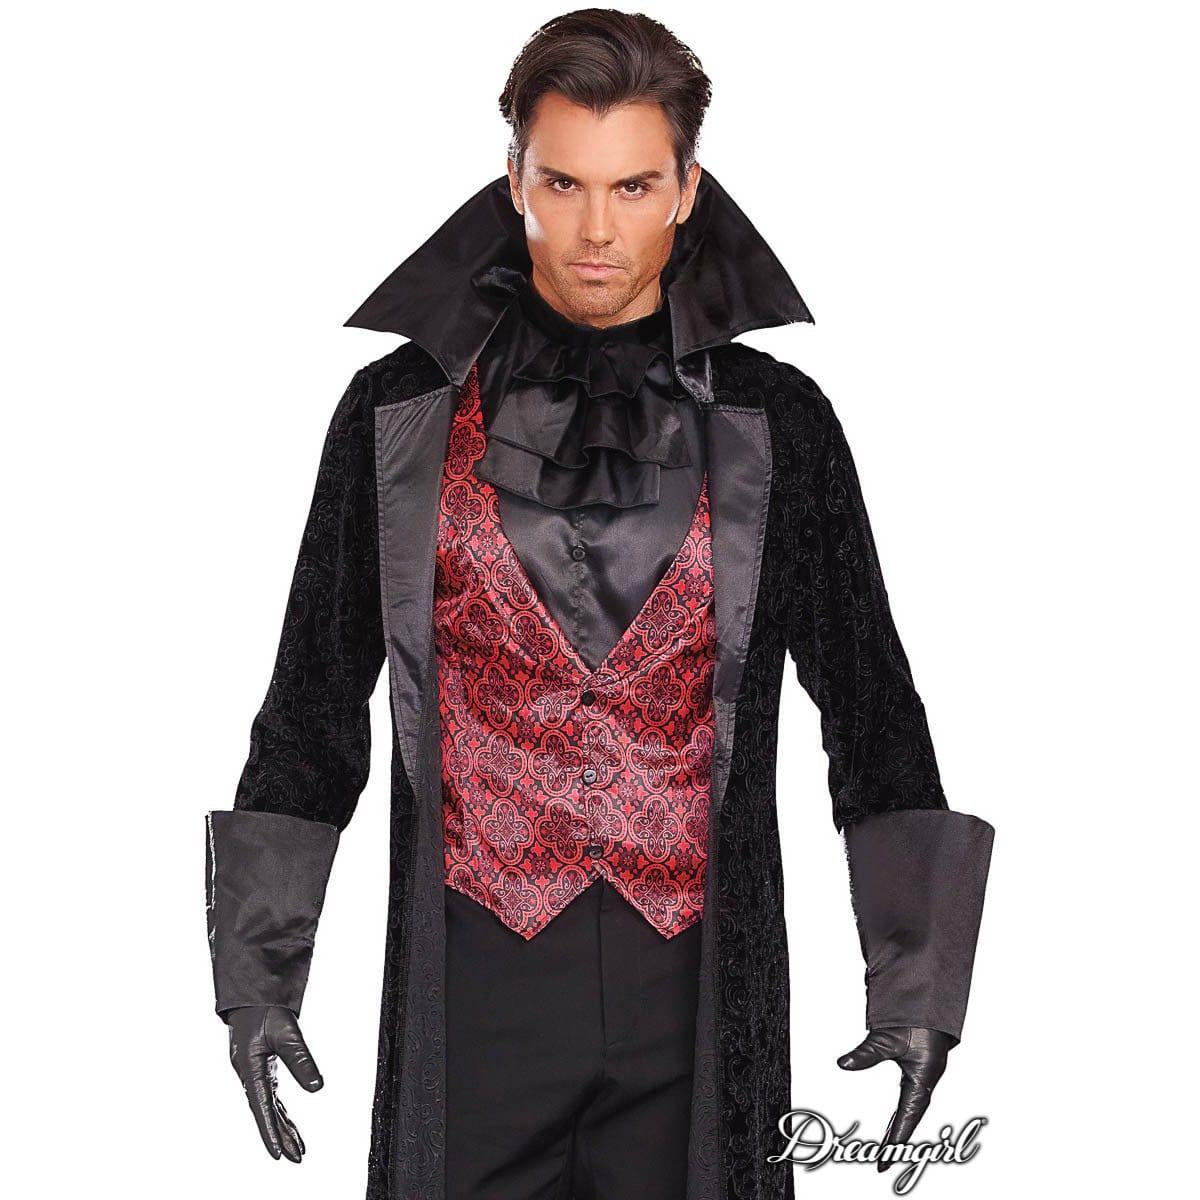 Buy Costumes Bloody Handsome Costume for Adults sold at Party Expert